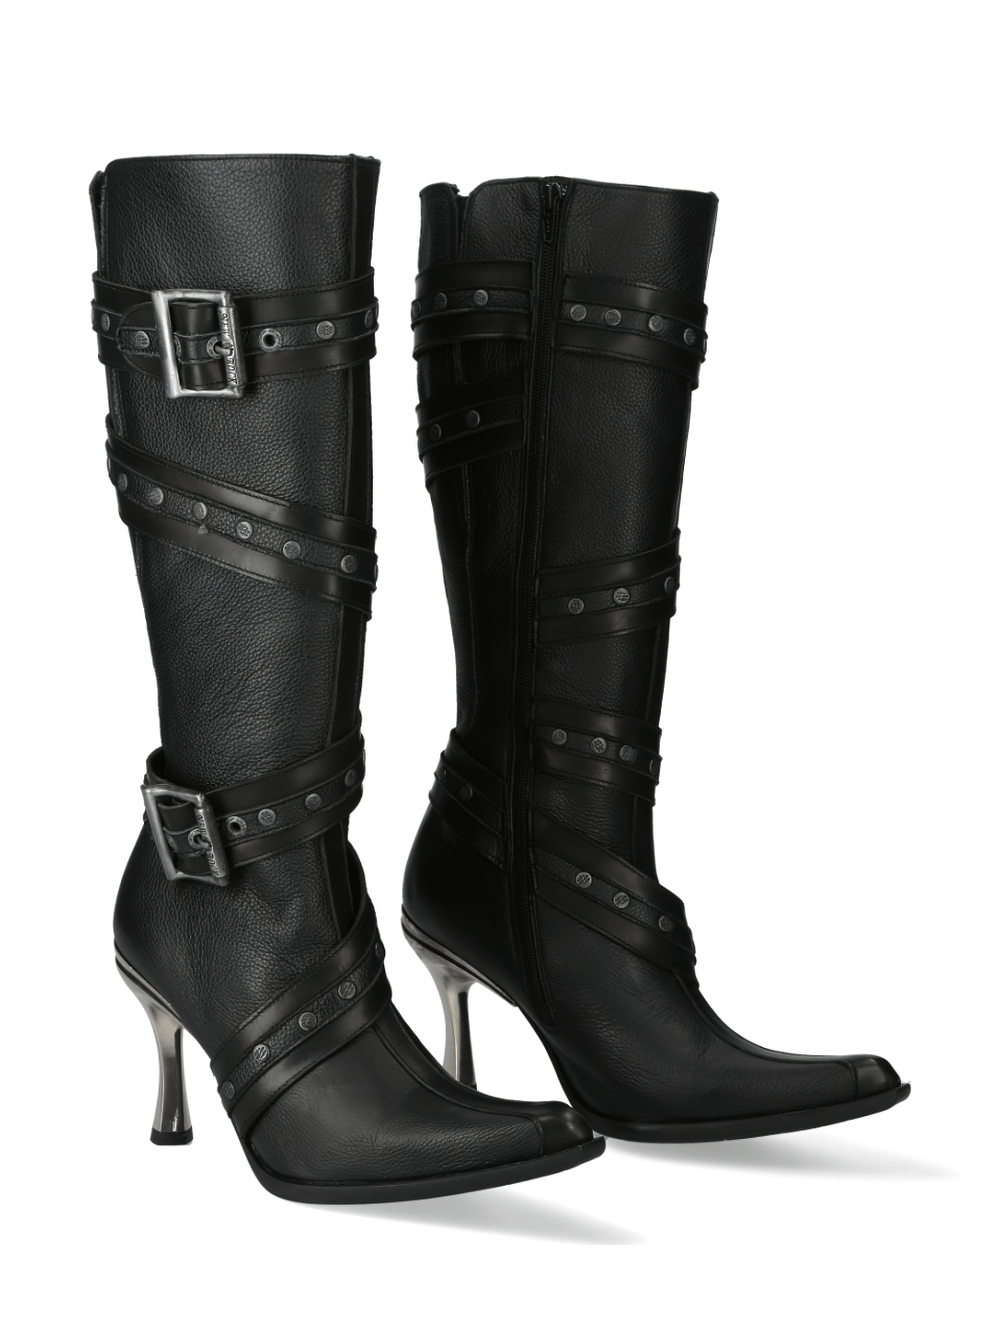 NEW ROCK Strap-Detailed Black Leather High Heel Boots